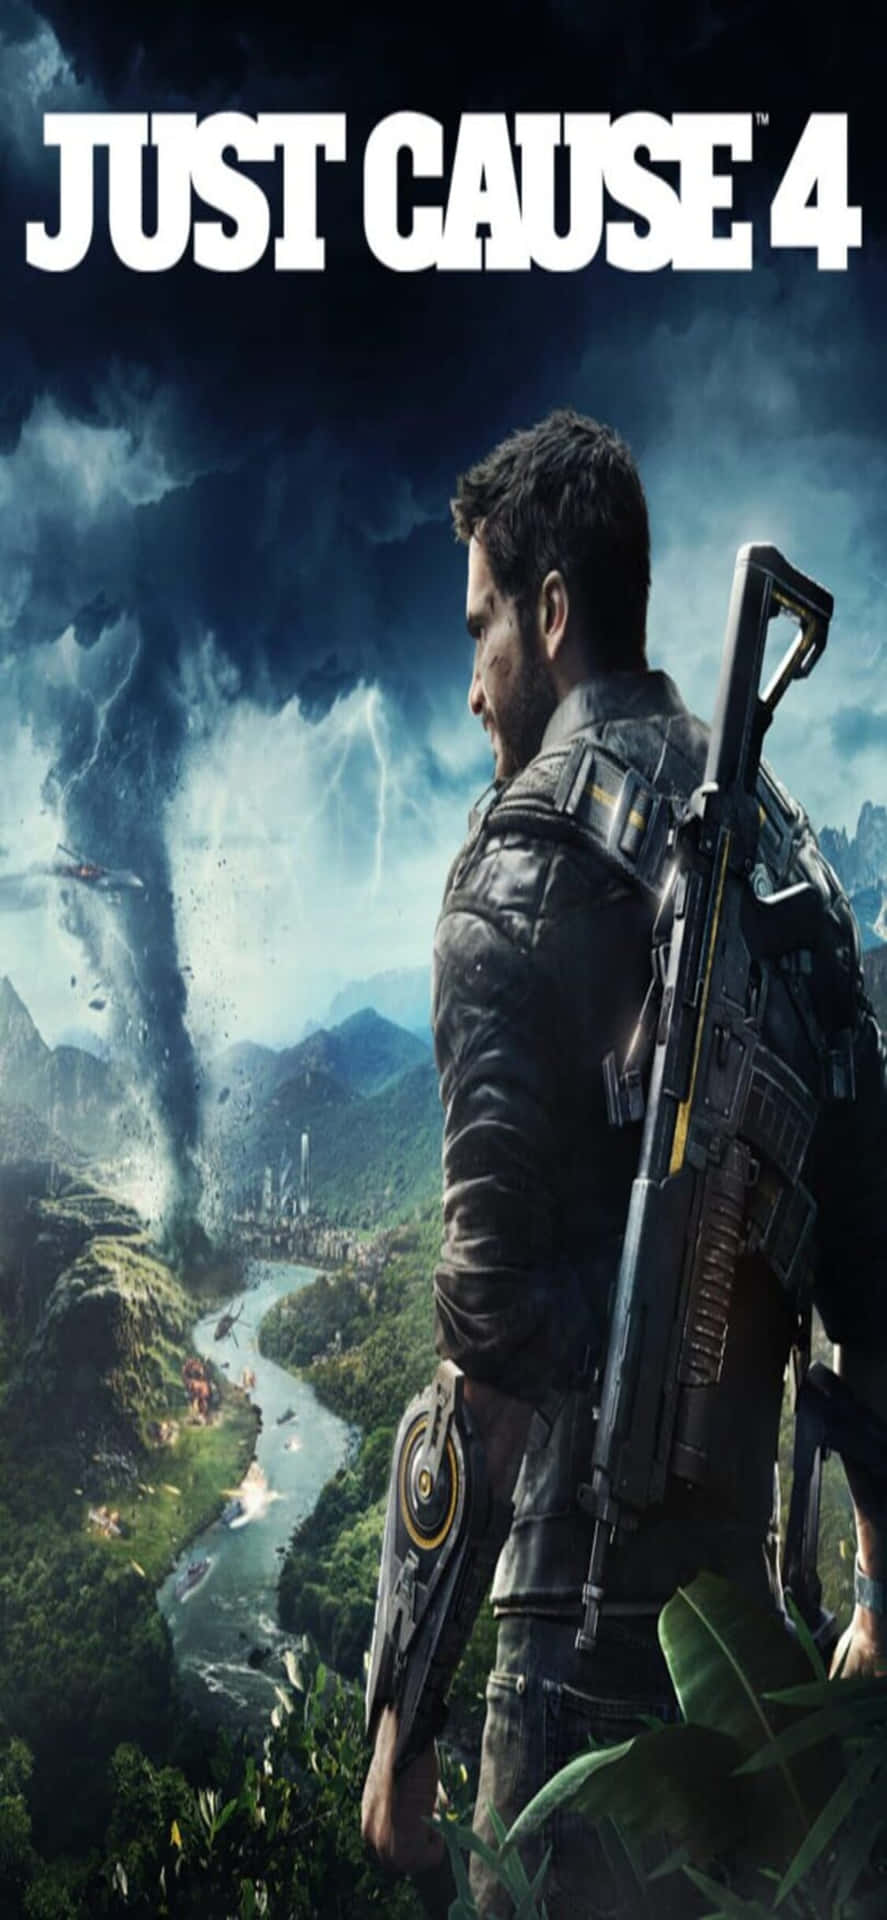 Giocaa Just Cause 4 Sul Tuo Iphone X!